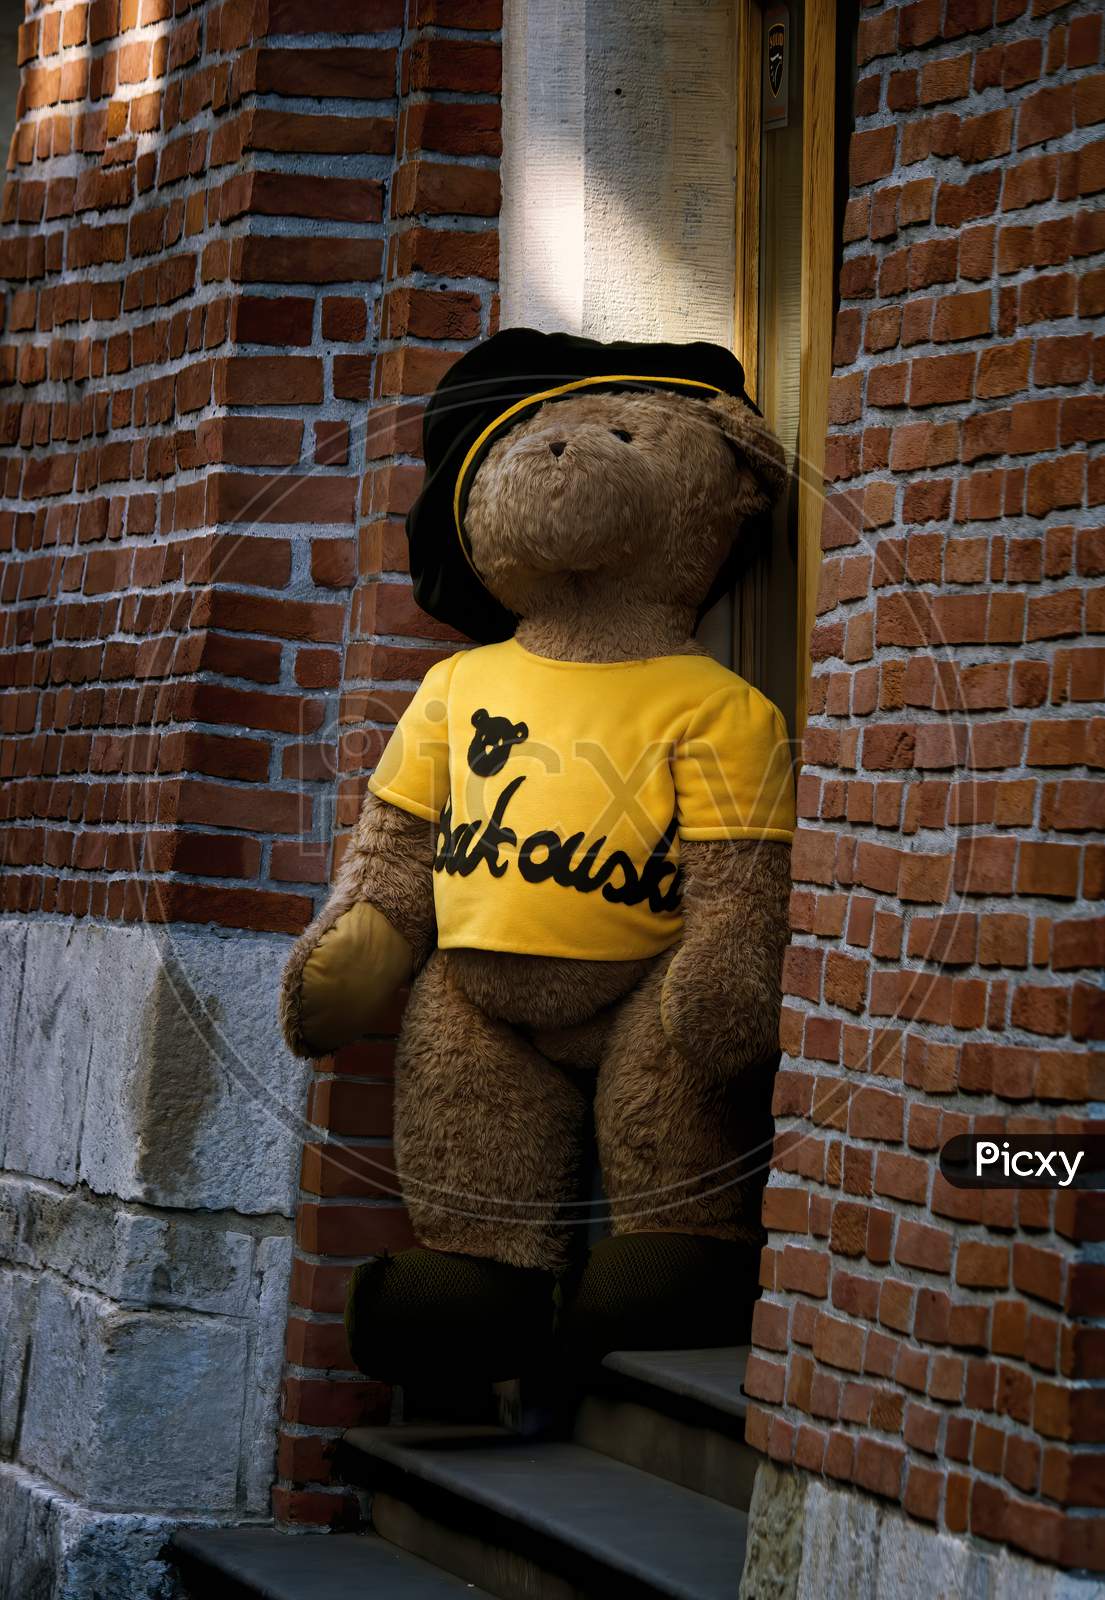 Krakow, Poland - May 03, 2015: A Huge Teddy Bear In Yellow T Shirt And A Cap Appears To Be Stepping Down From A Random Shop